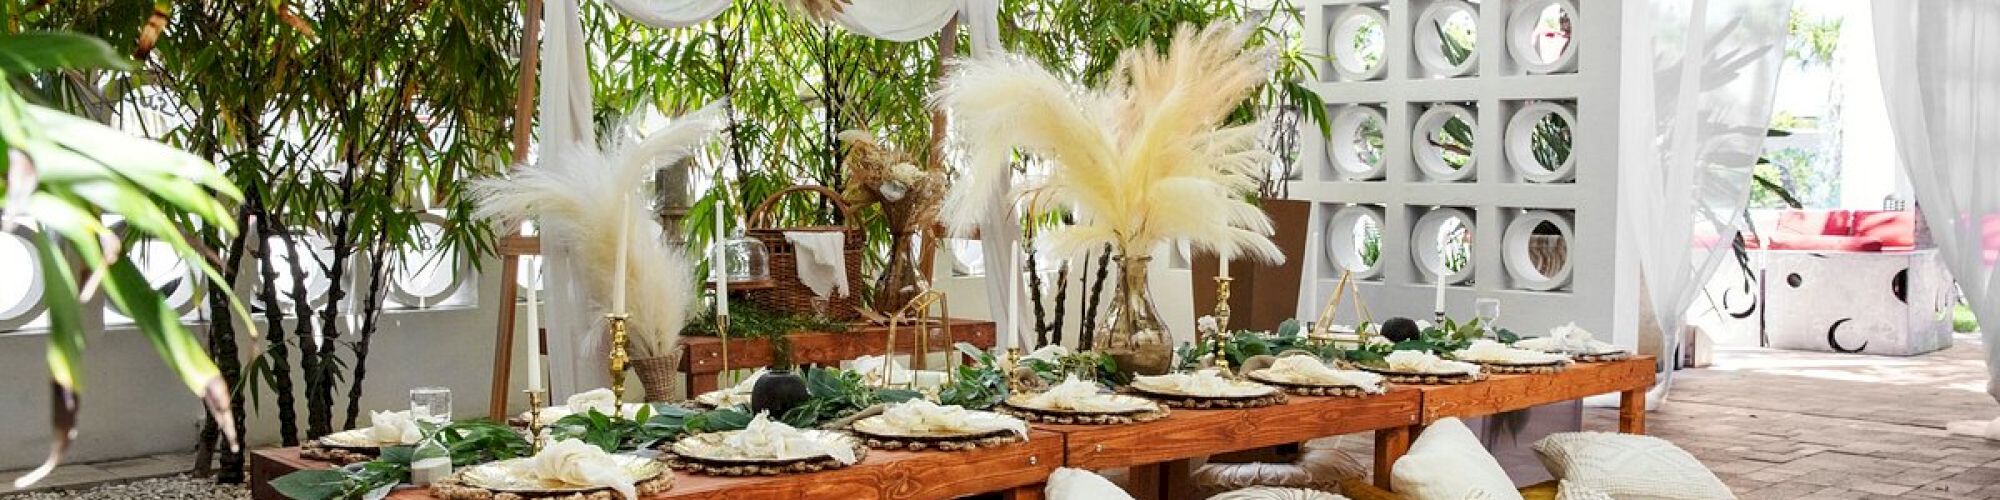 An elegant outdoor dining setup with a low wooden table, cushions, plants, and decorative feathers, creating a cozy and serene ambiance.